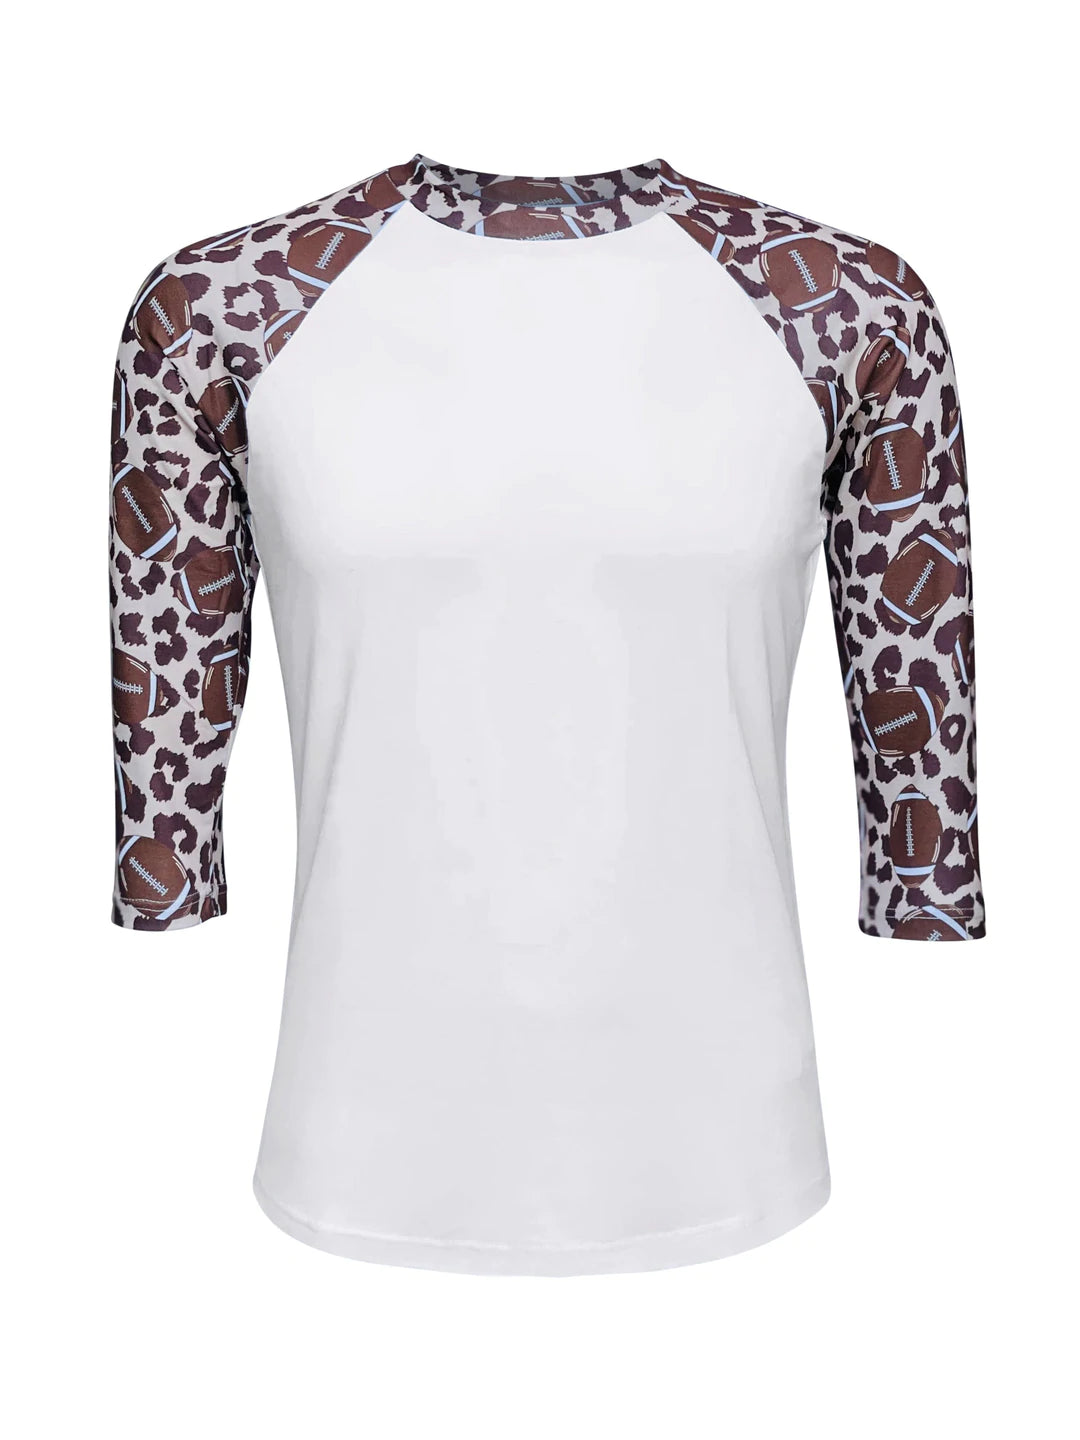 Football Leopard Raglan- white, high poly (great sublimation shirt!)